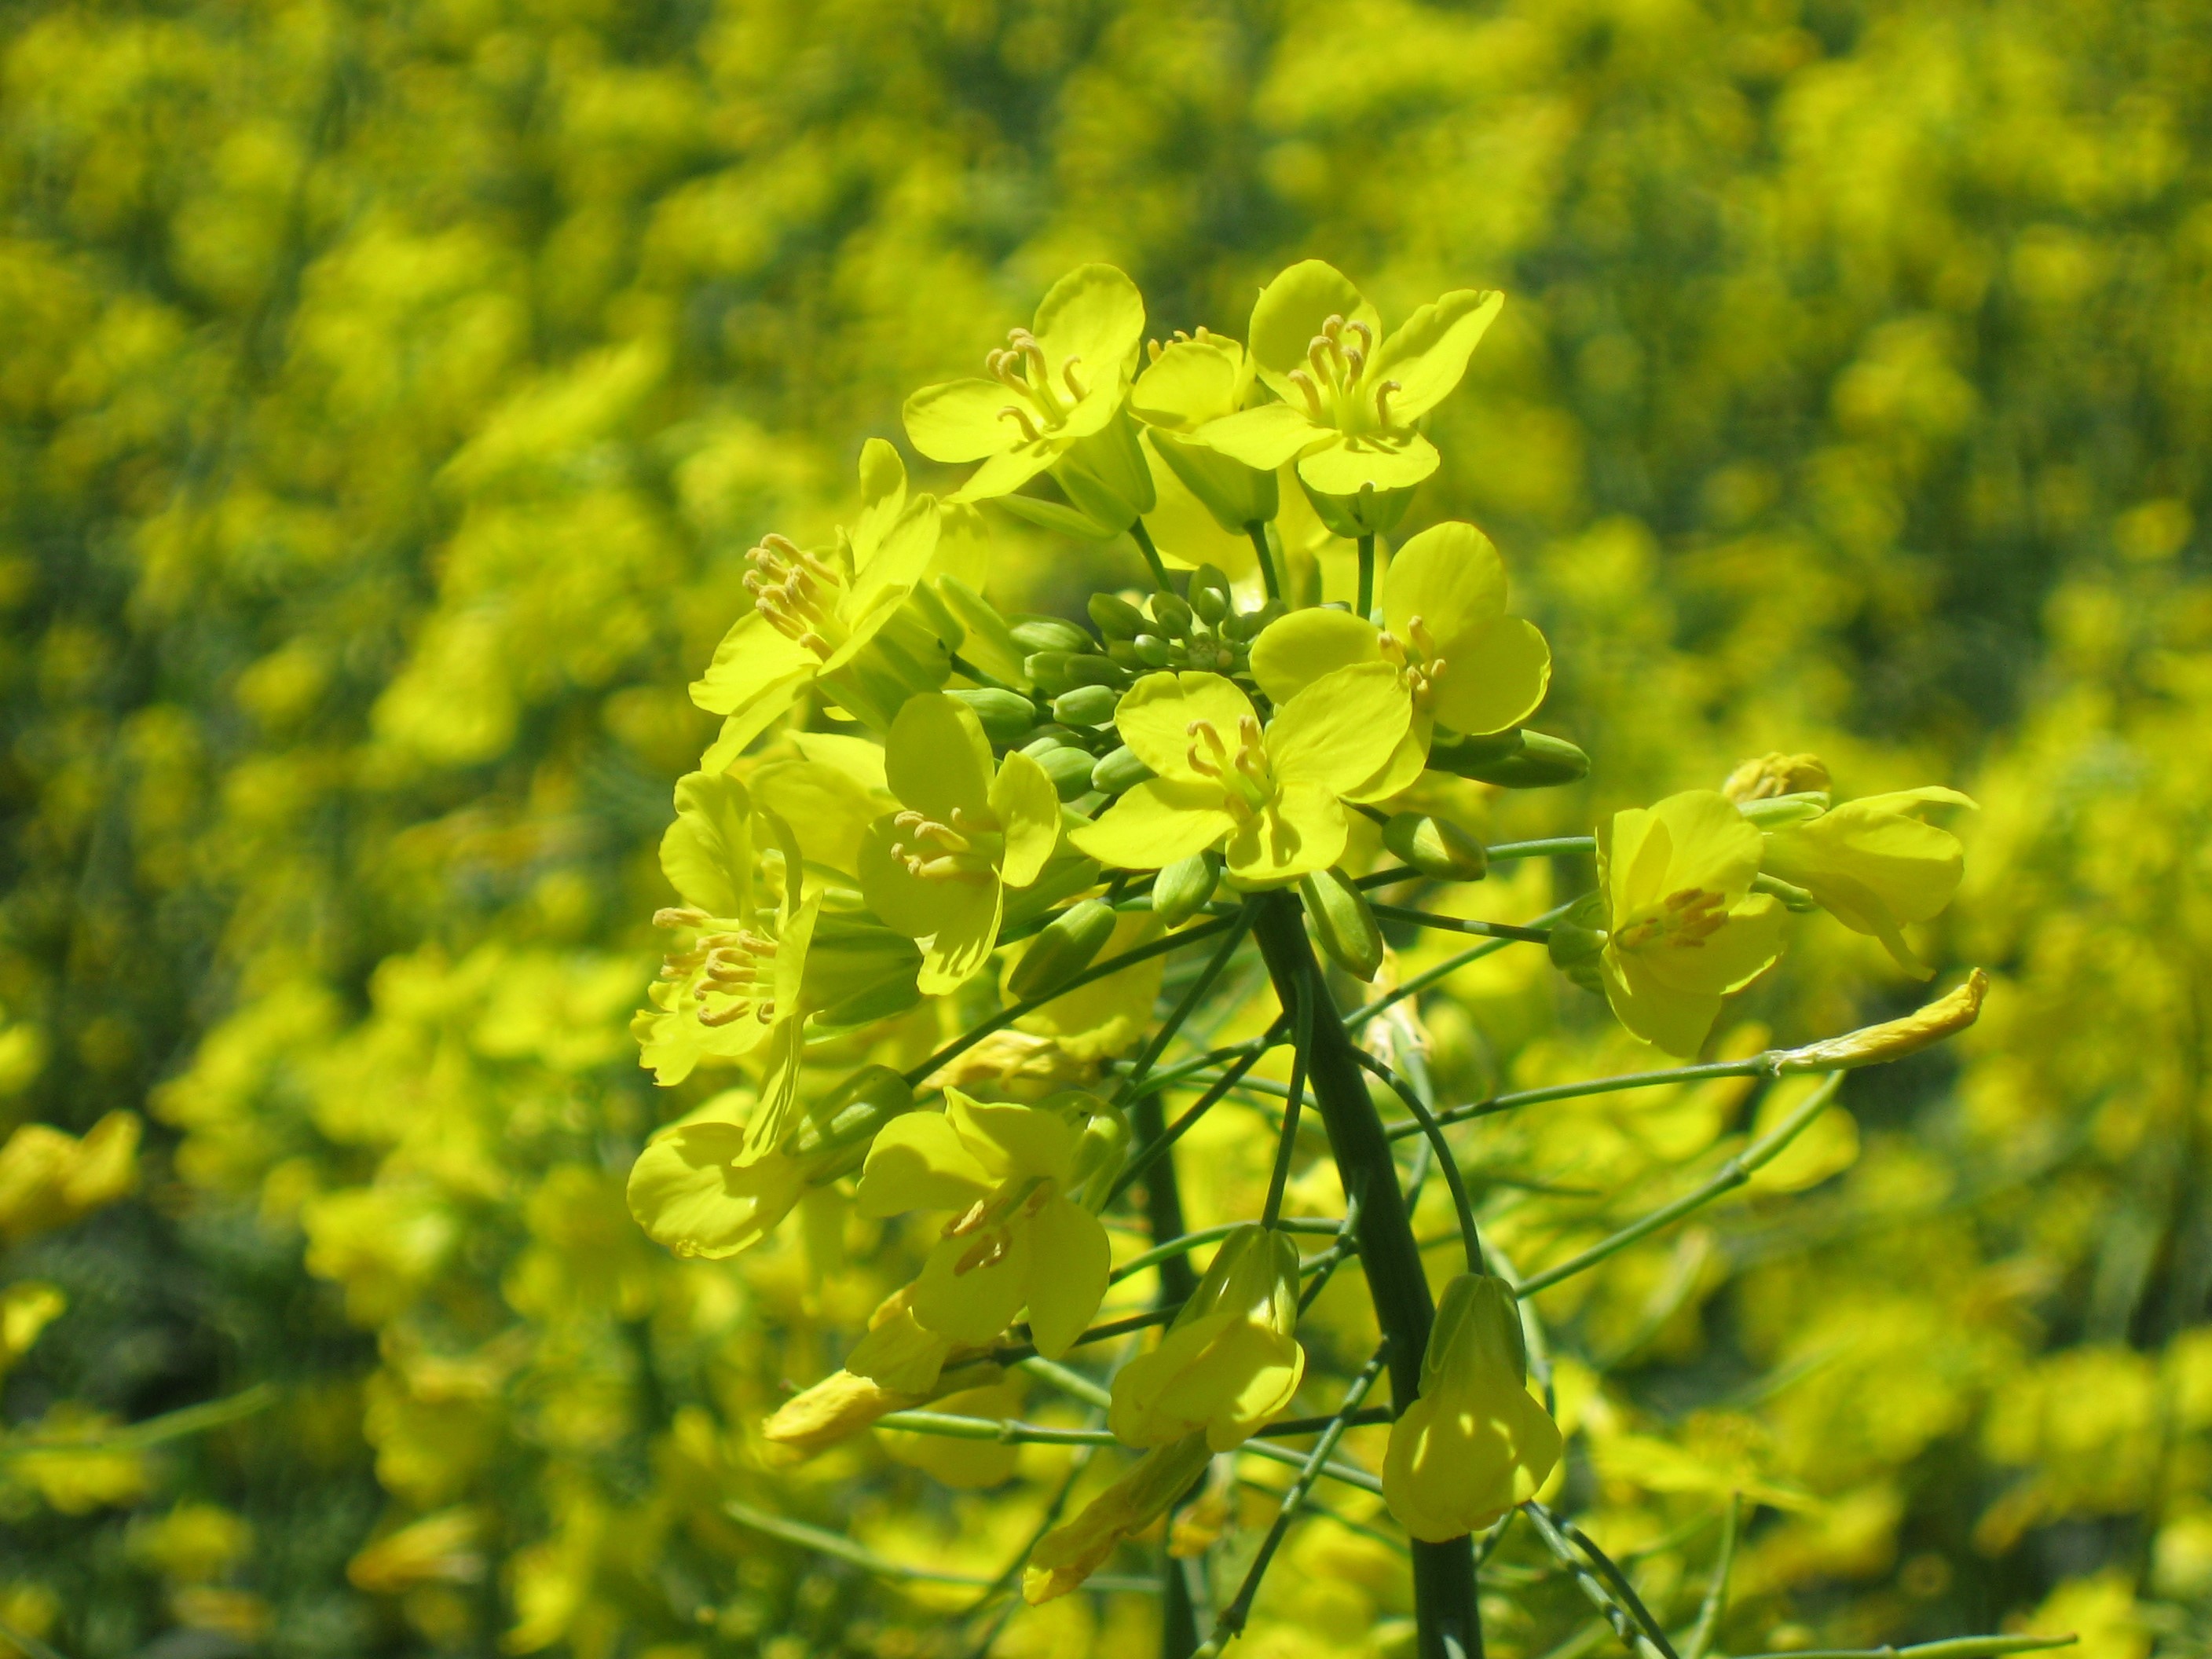 Industry Anticipates Canola Limiting Factor for 2011 in Oklahoma Will be Seed- 200,000 Acres May Be Possible